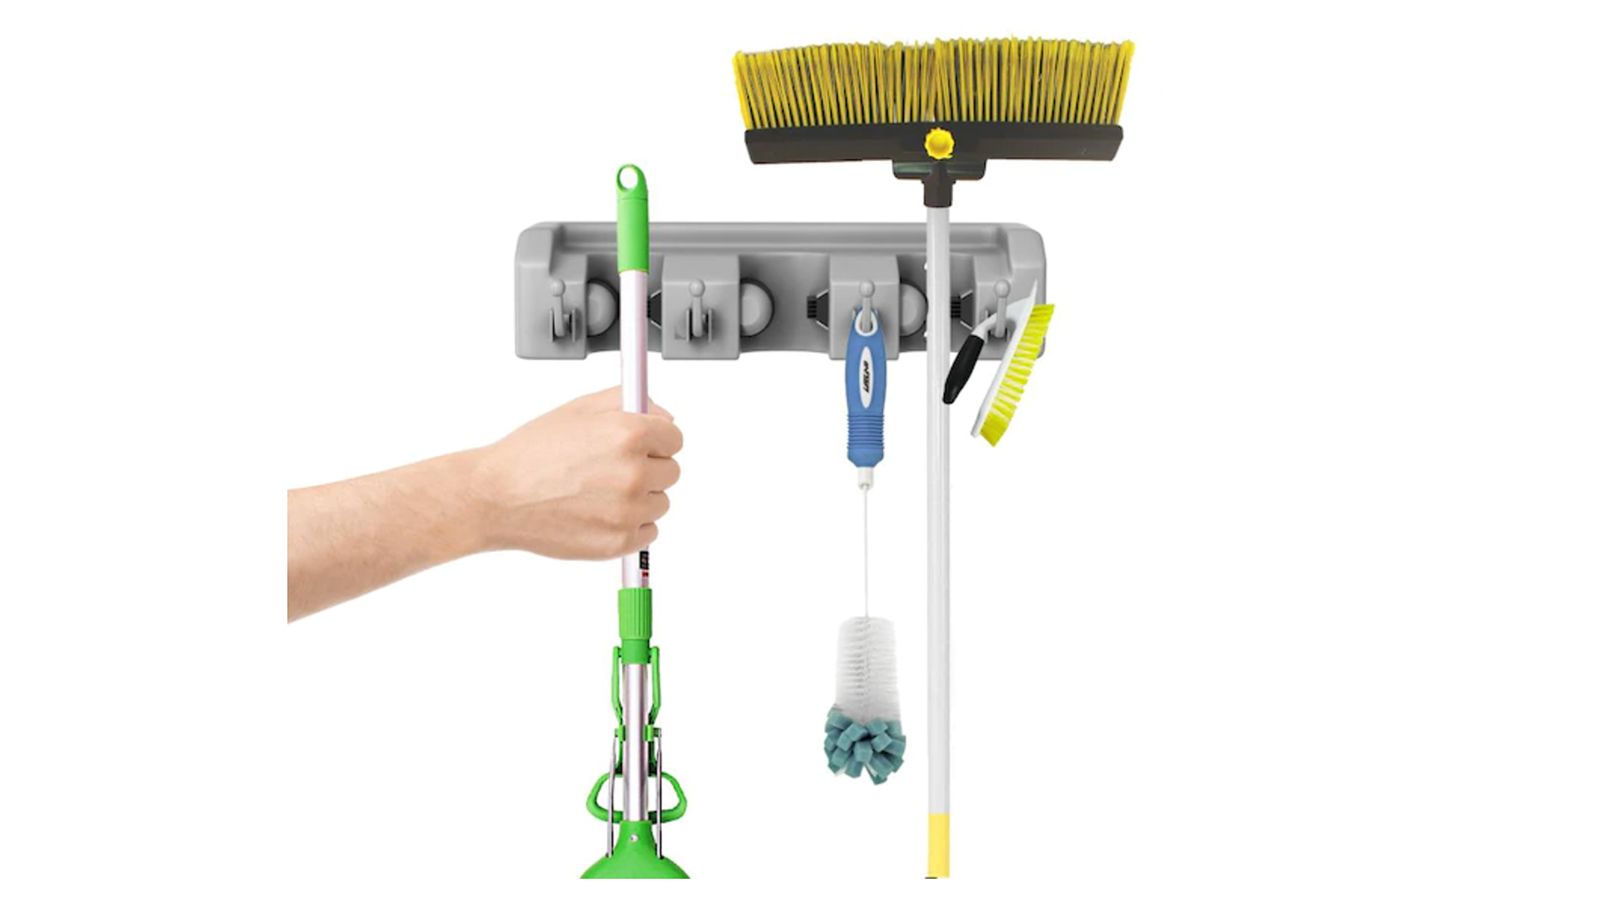 This Mop and Broom Holder Instantly Declutters Your Closet or Garage